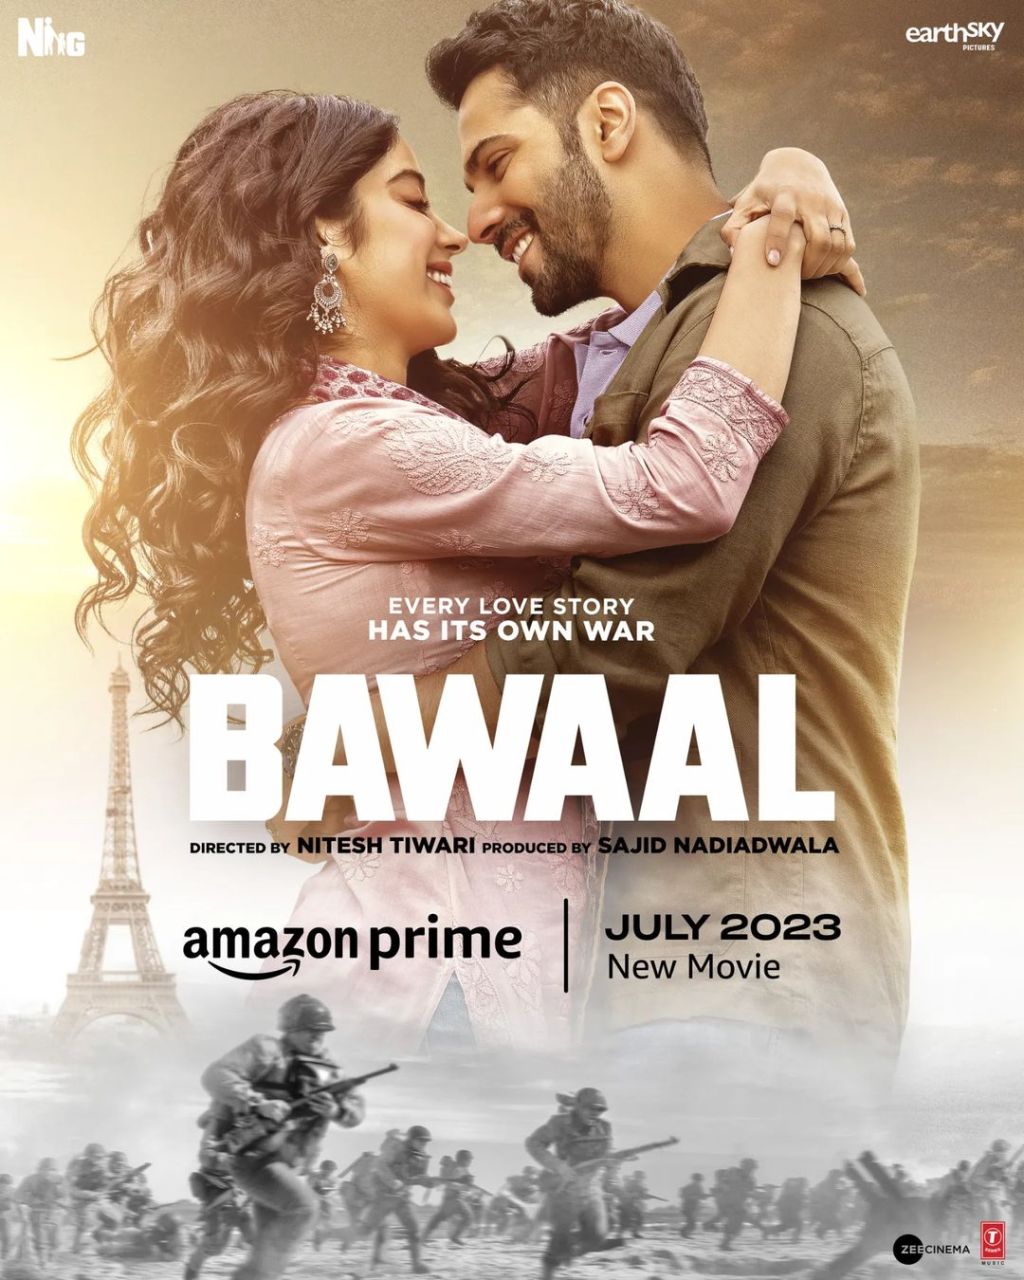 Bawaal Film Review: A Highly Insensitive And Tone-Deaf Bollywood Film That Needs A Reality Check